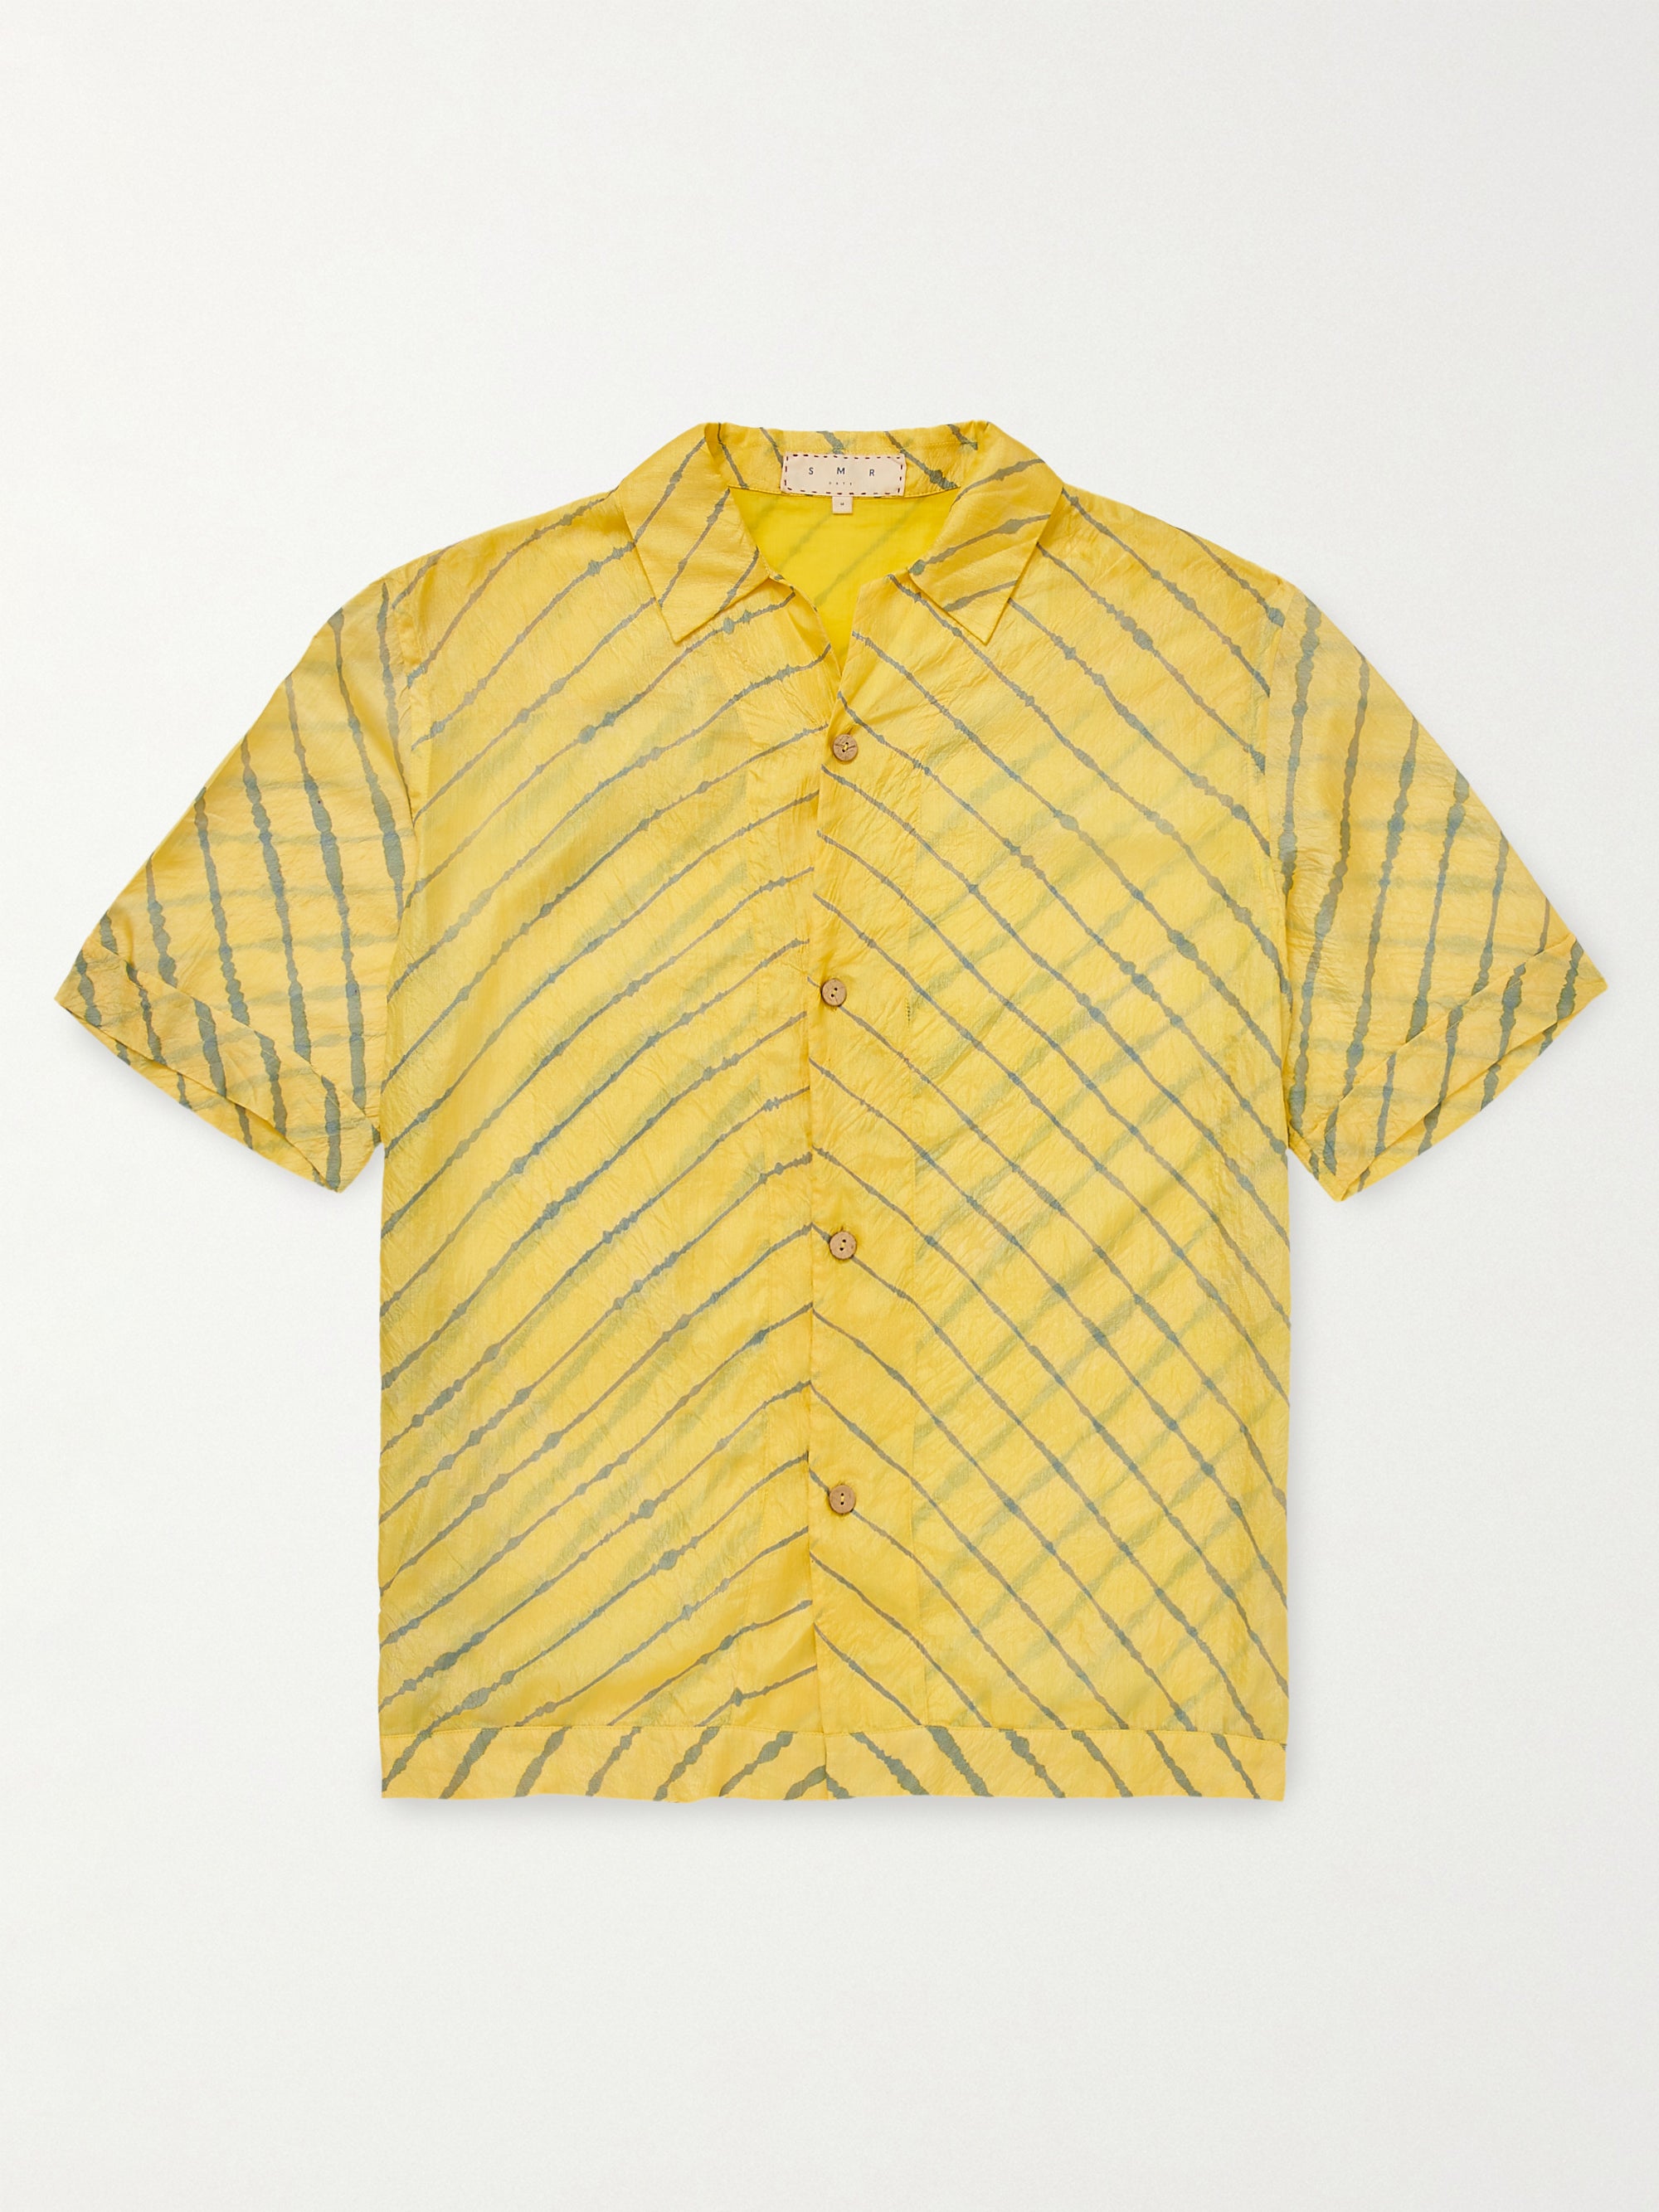 Bakoven Shirt in Yellow and Grey